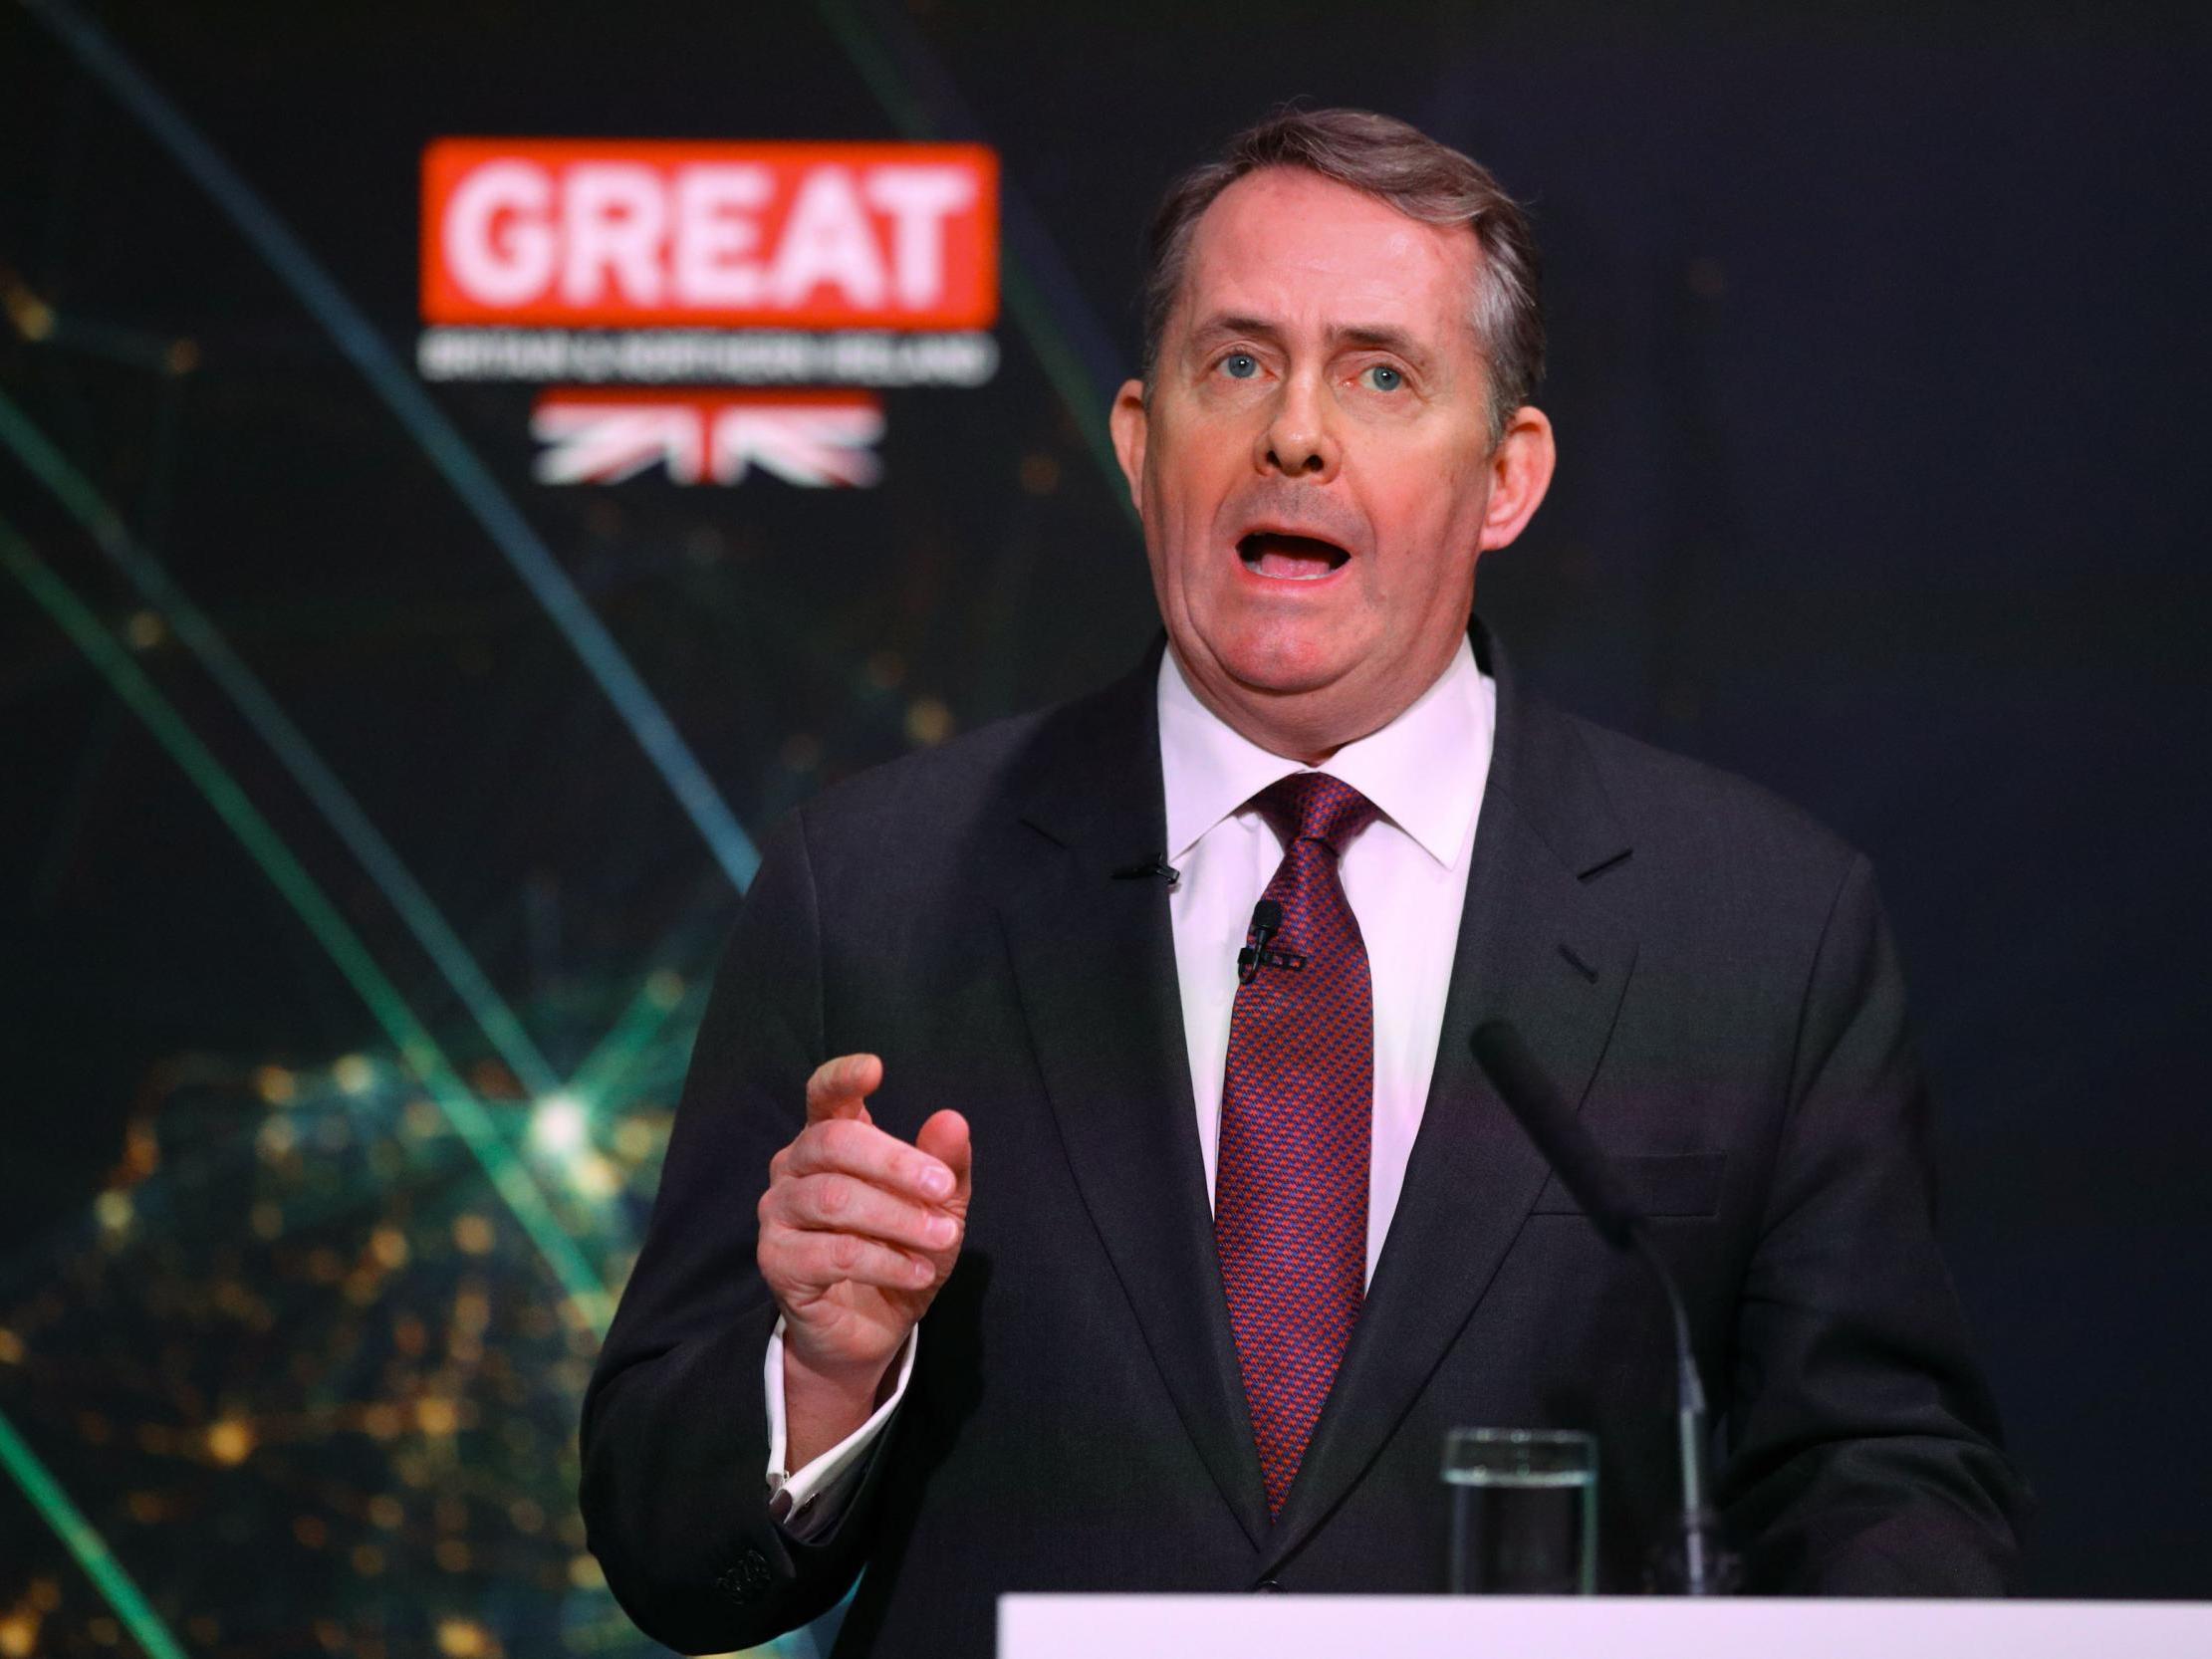 Secretary of State for International Trade Liam Fox has defended the potential introduction of chlorine-washed chicken to British supermarkets